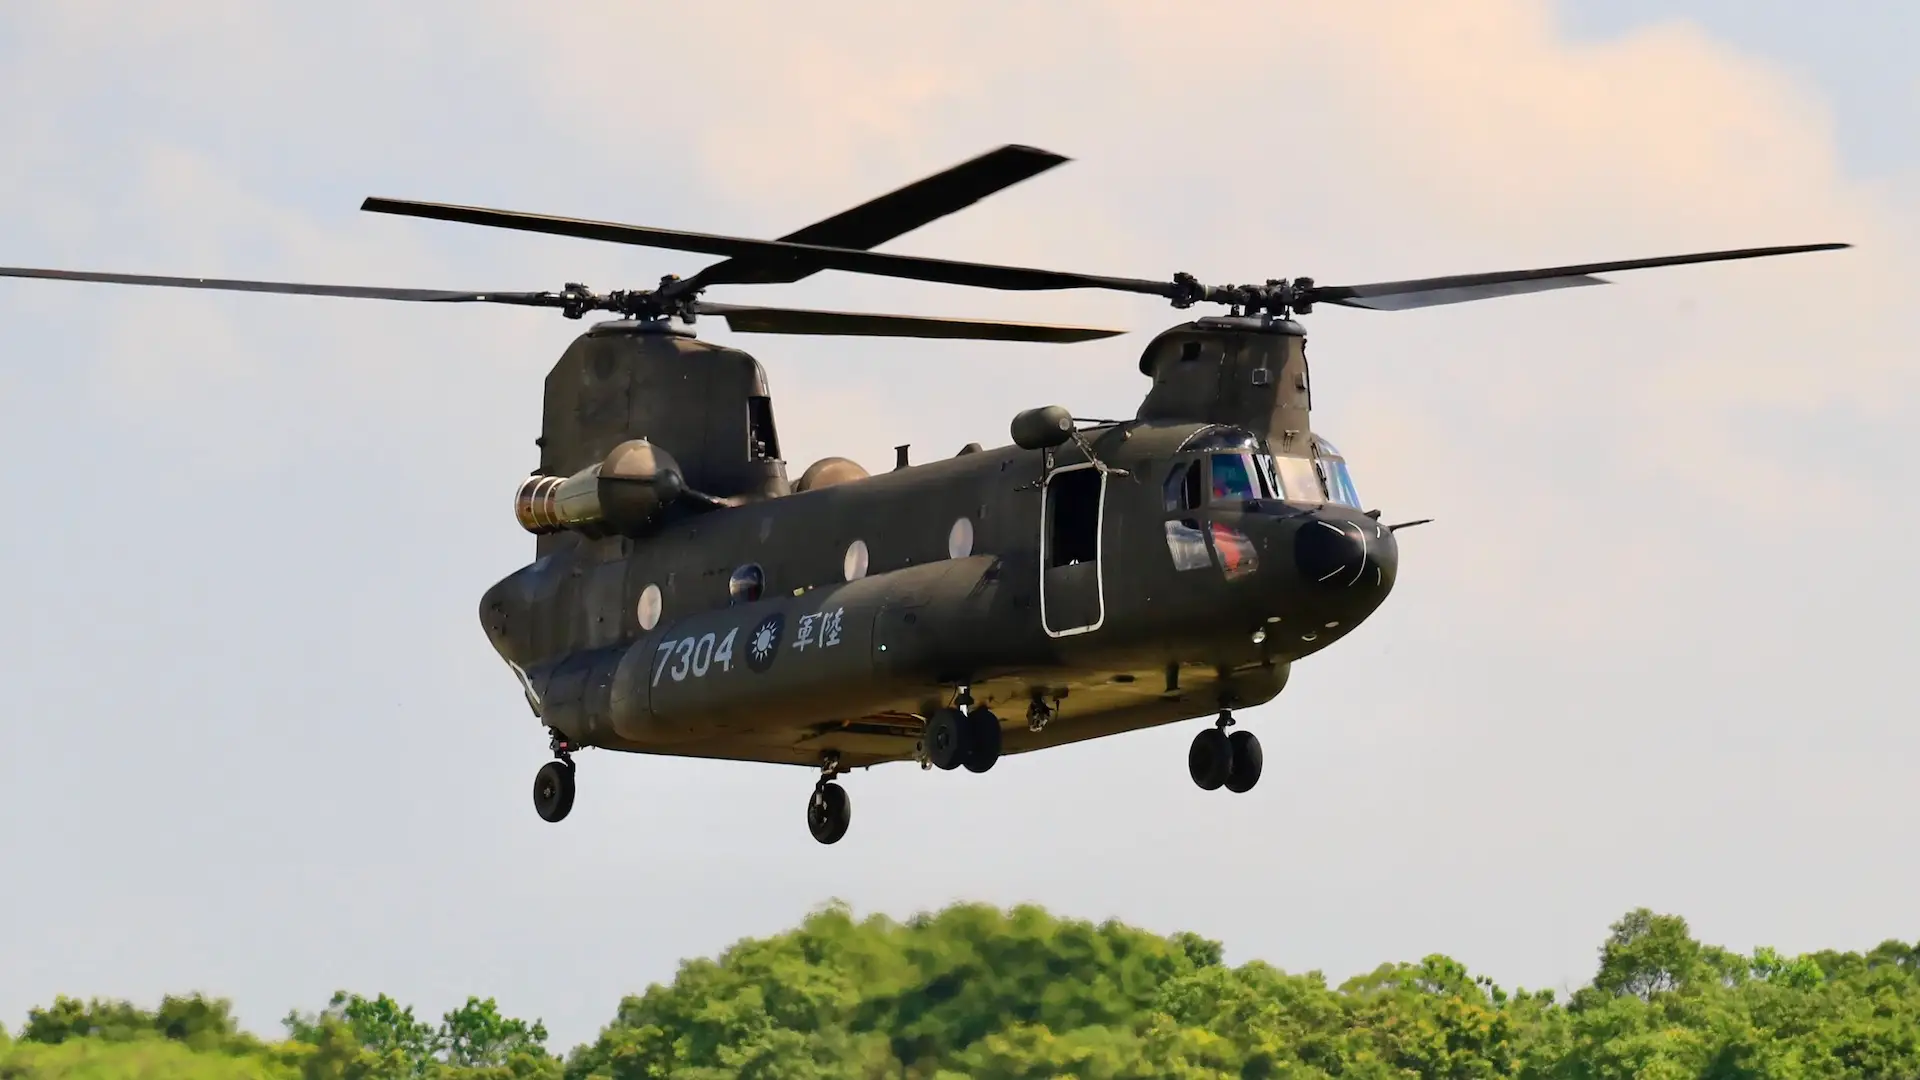 A Taiwanese pilot tried to hijack a US CH-47 Chinook helicopter to China for a $15m reward